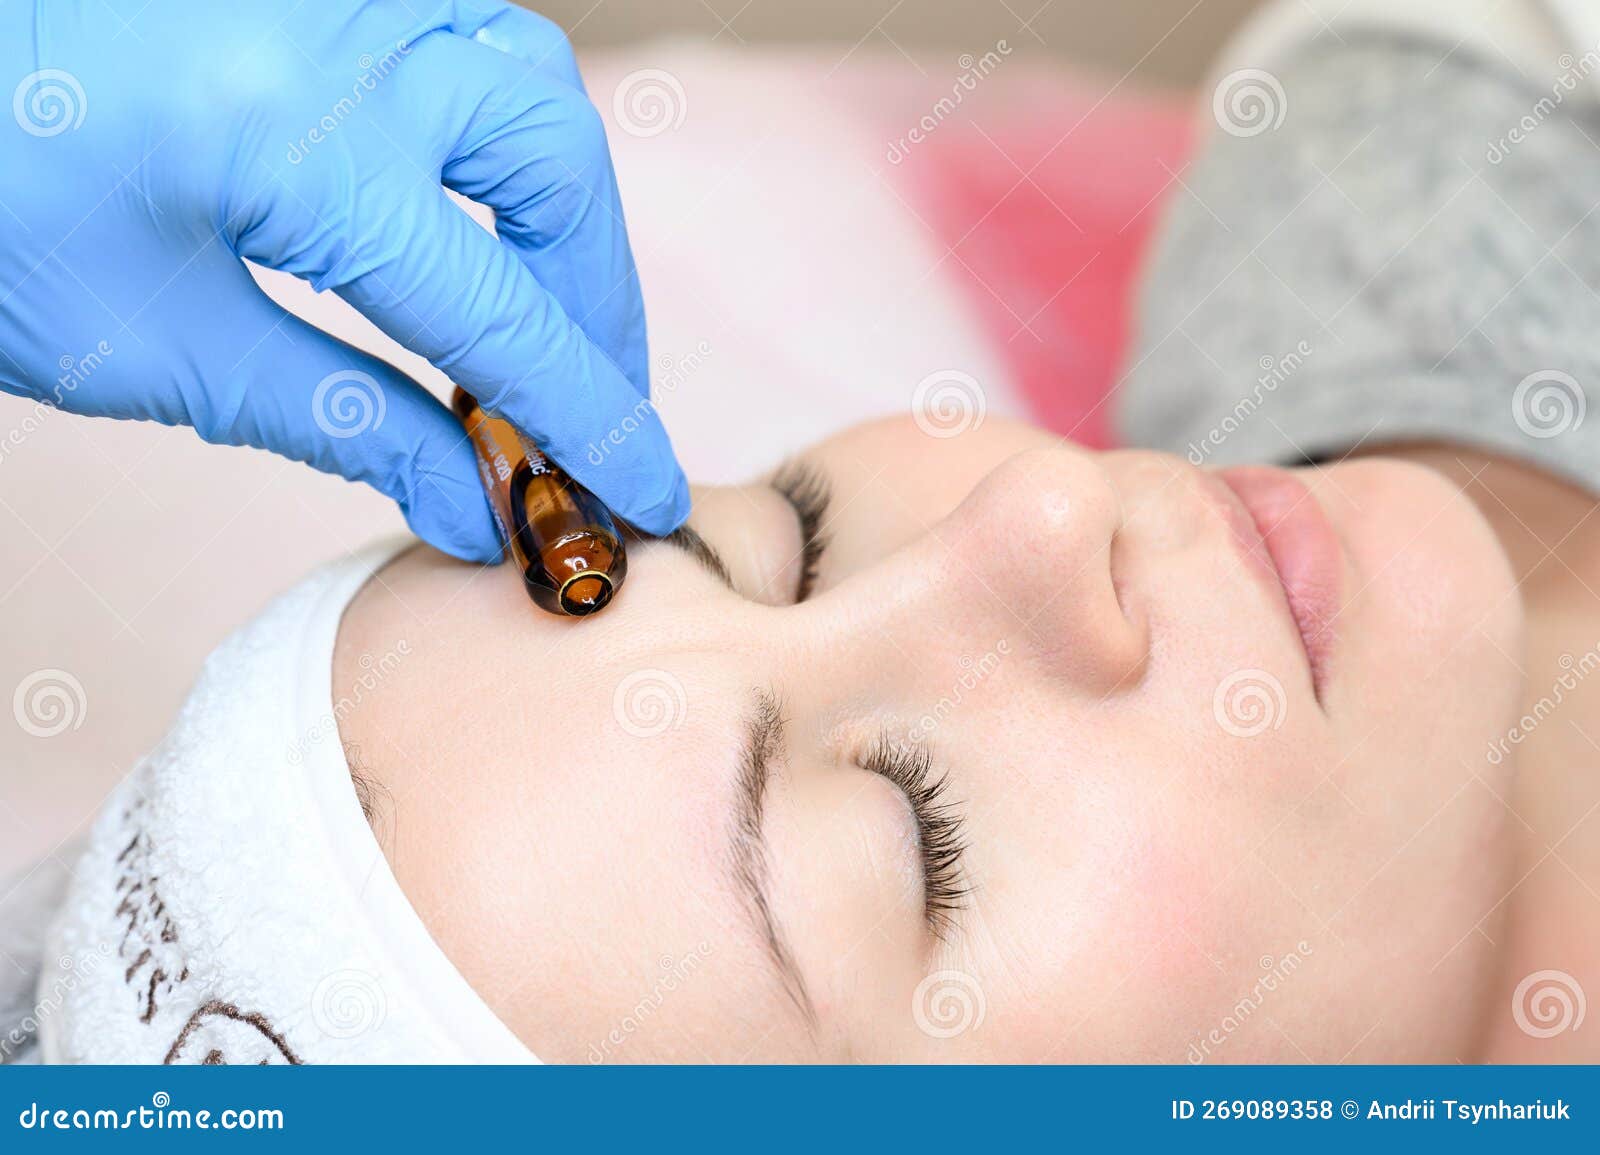 ampoule with vitamin c for application directly to the face for the mesotherapy procedure with the help of a dermapen.